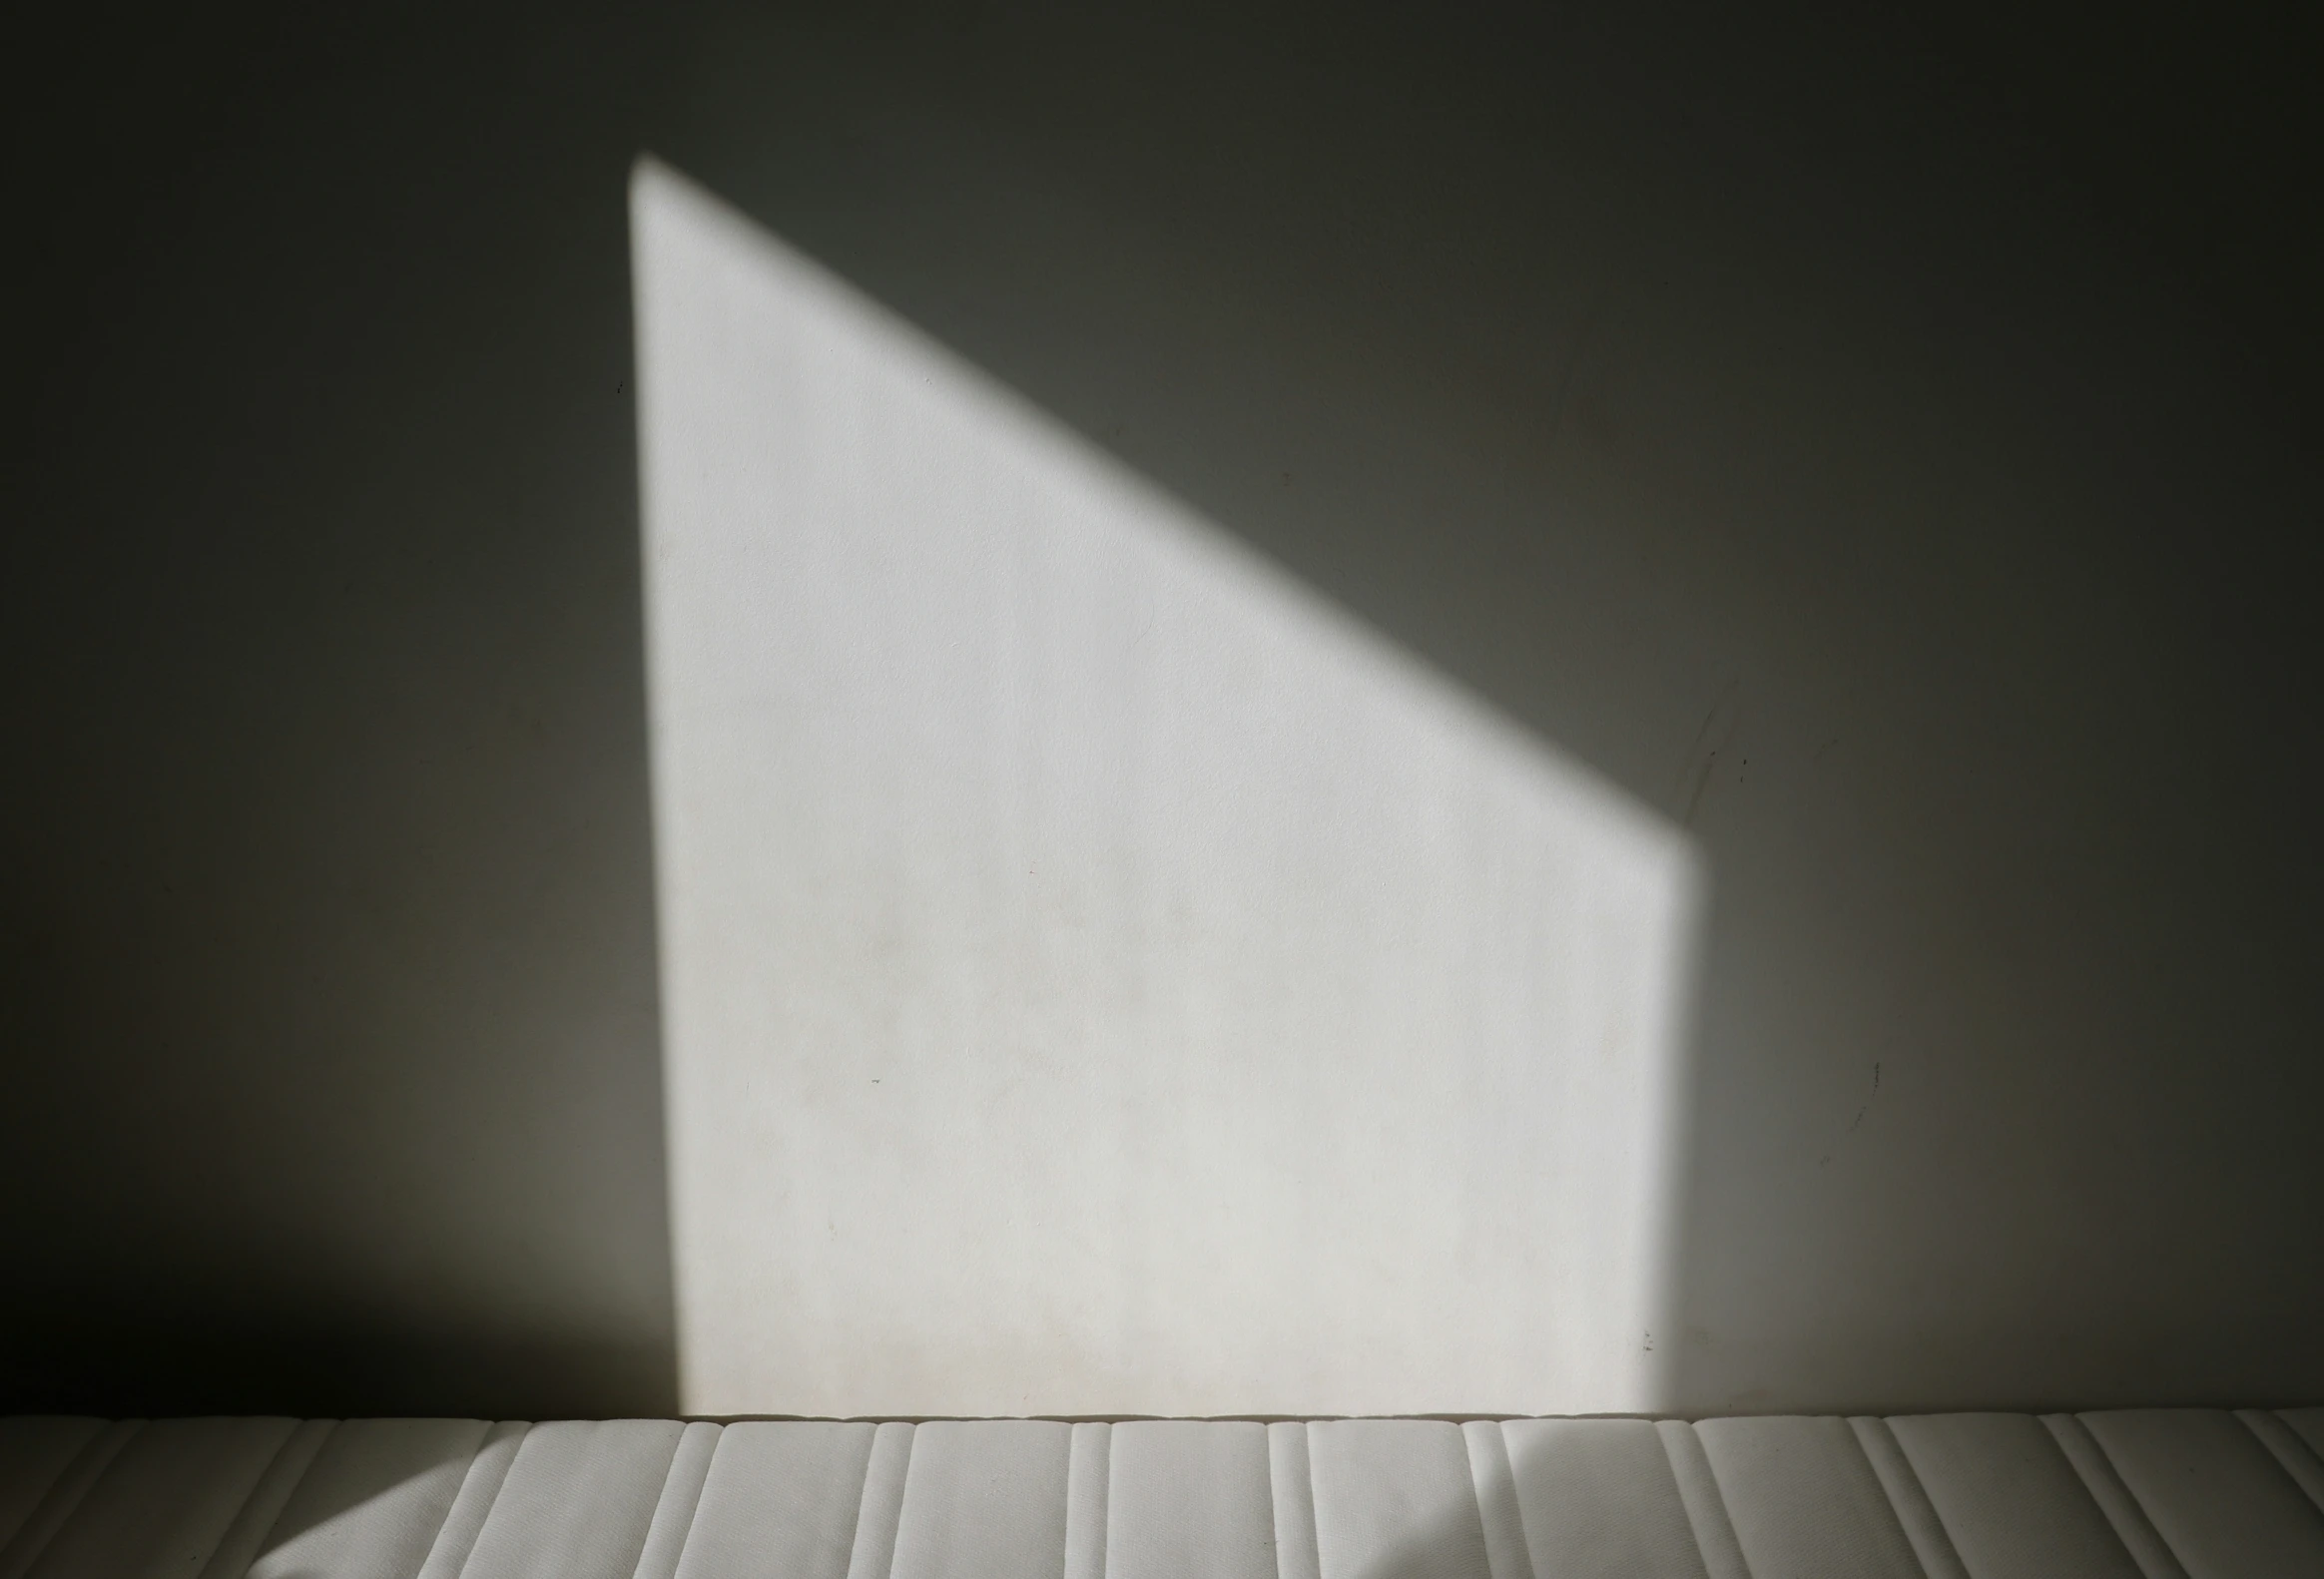 a shadow is cast from the side of a white box